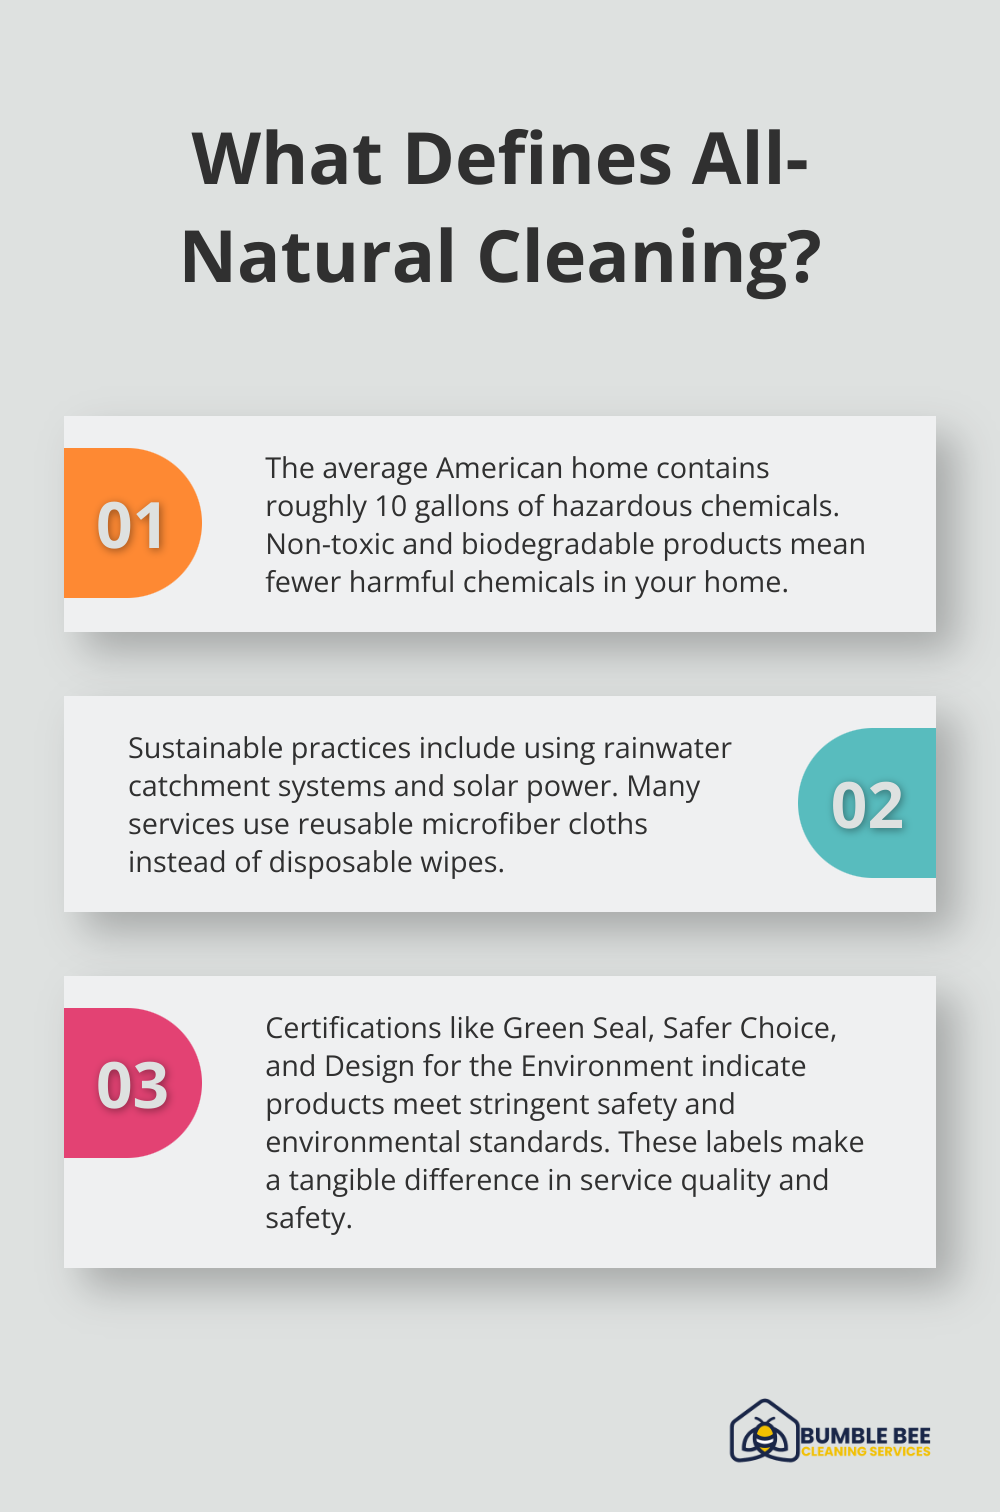 Fact - What Defines All-Natural Cleaning?